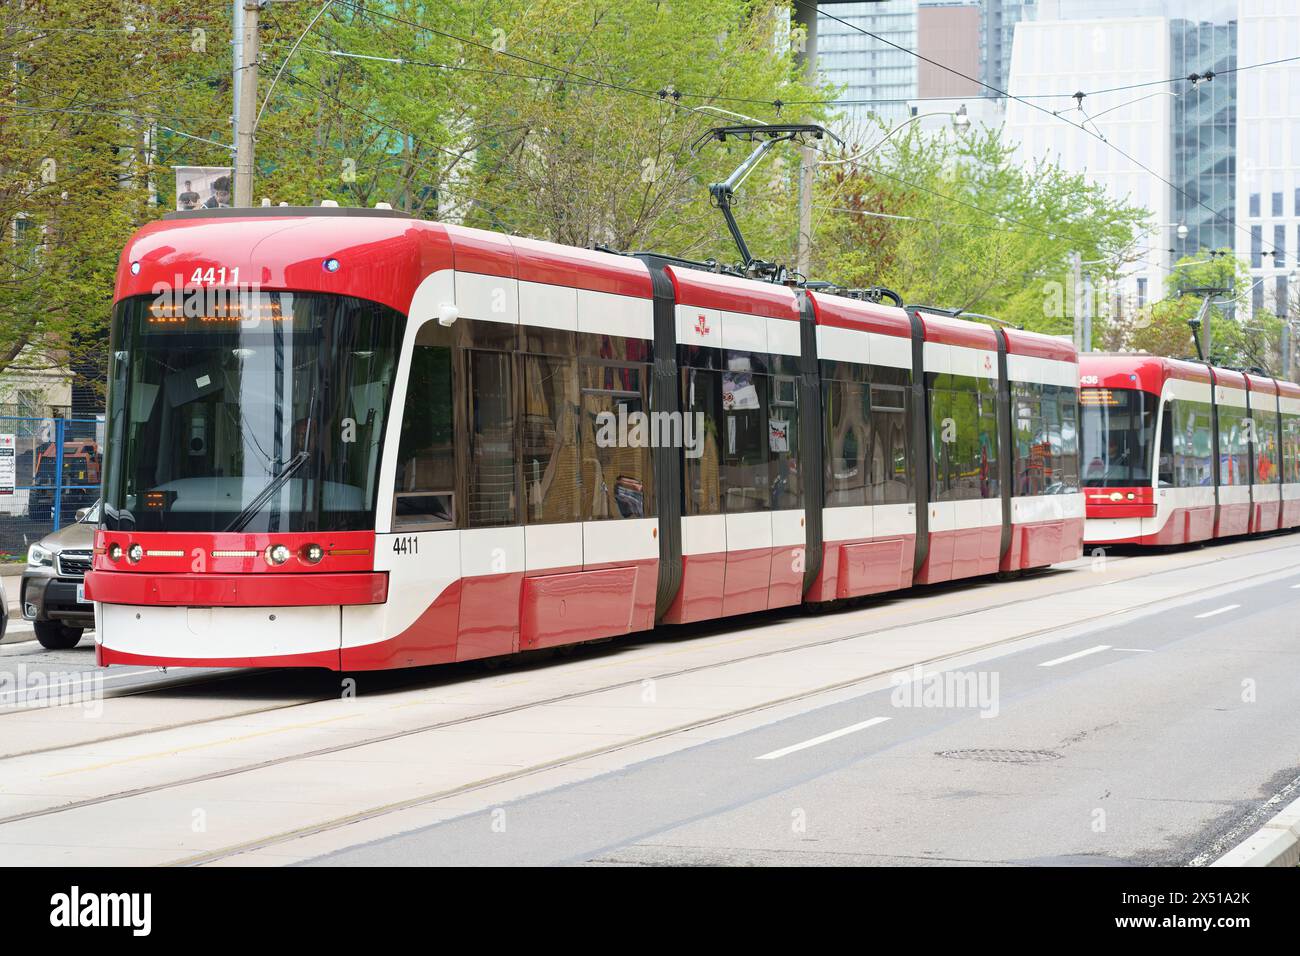 Bombardier Flexity Outlook Streetcar or Tramway in Toronto, Canada Stock Photo